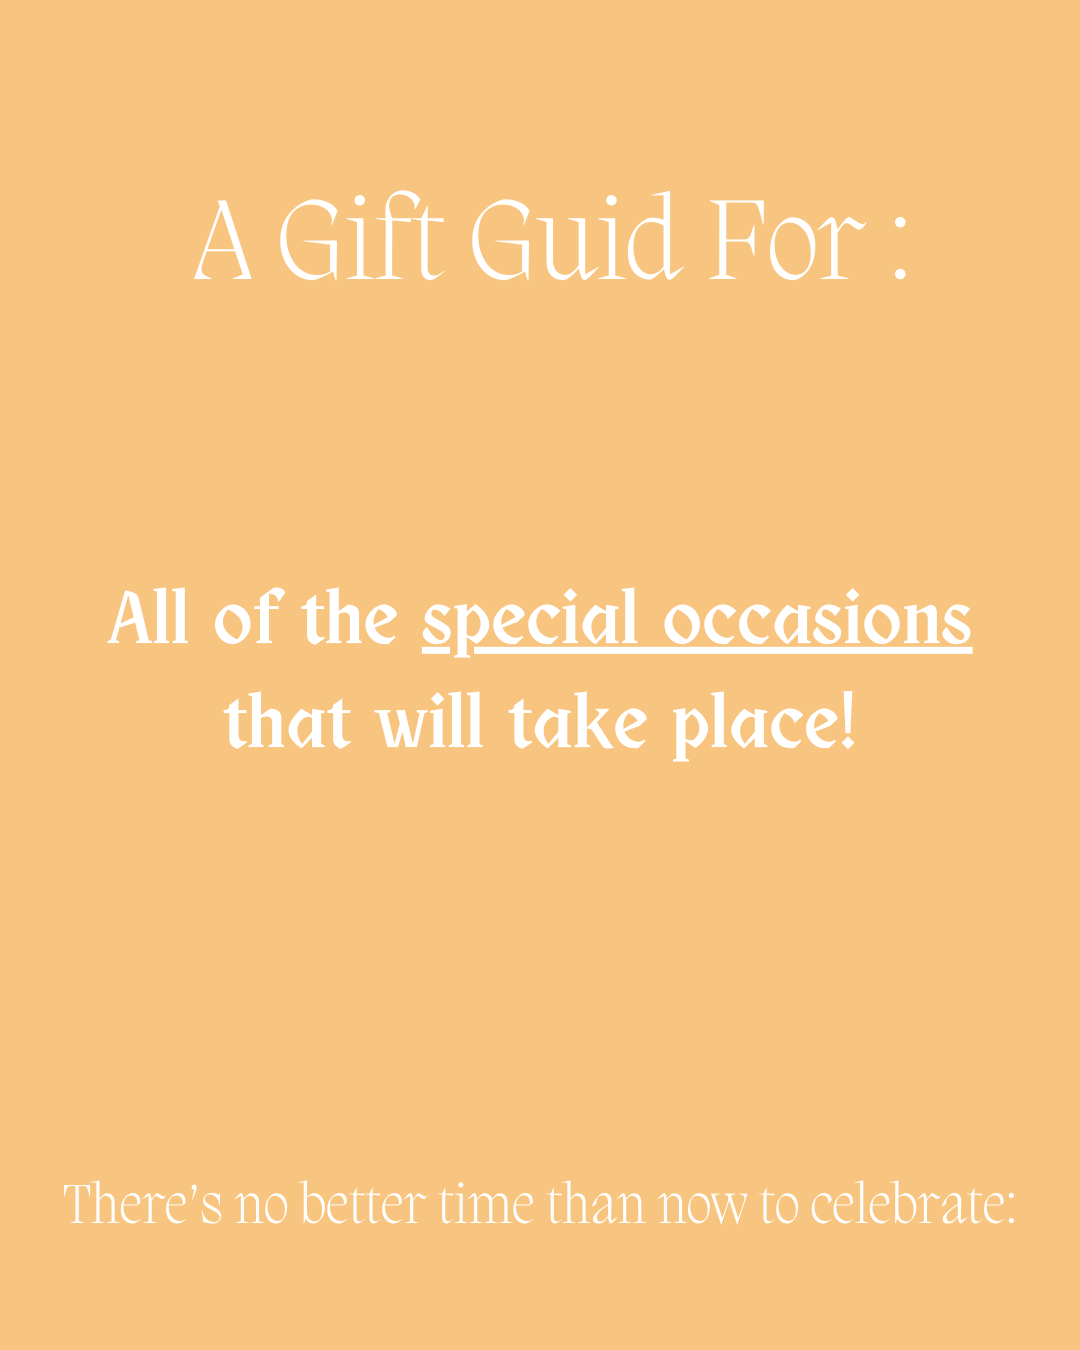 A Gift Guide for A Few of Life's Special Occasions